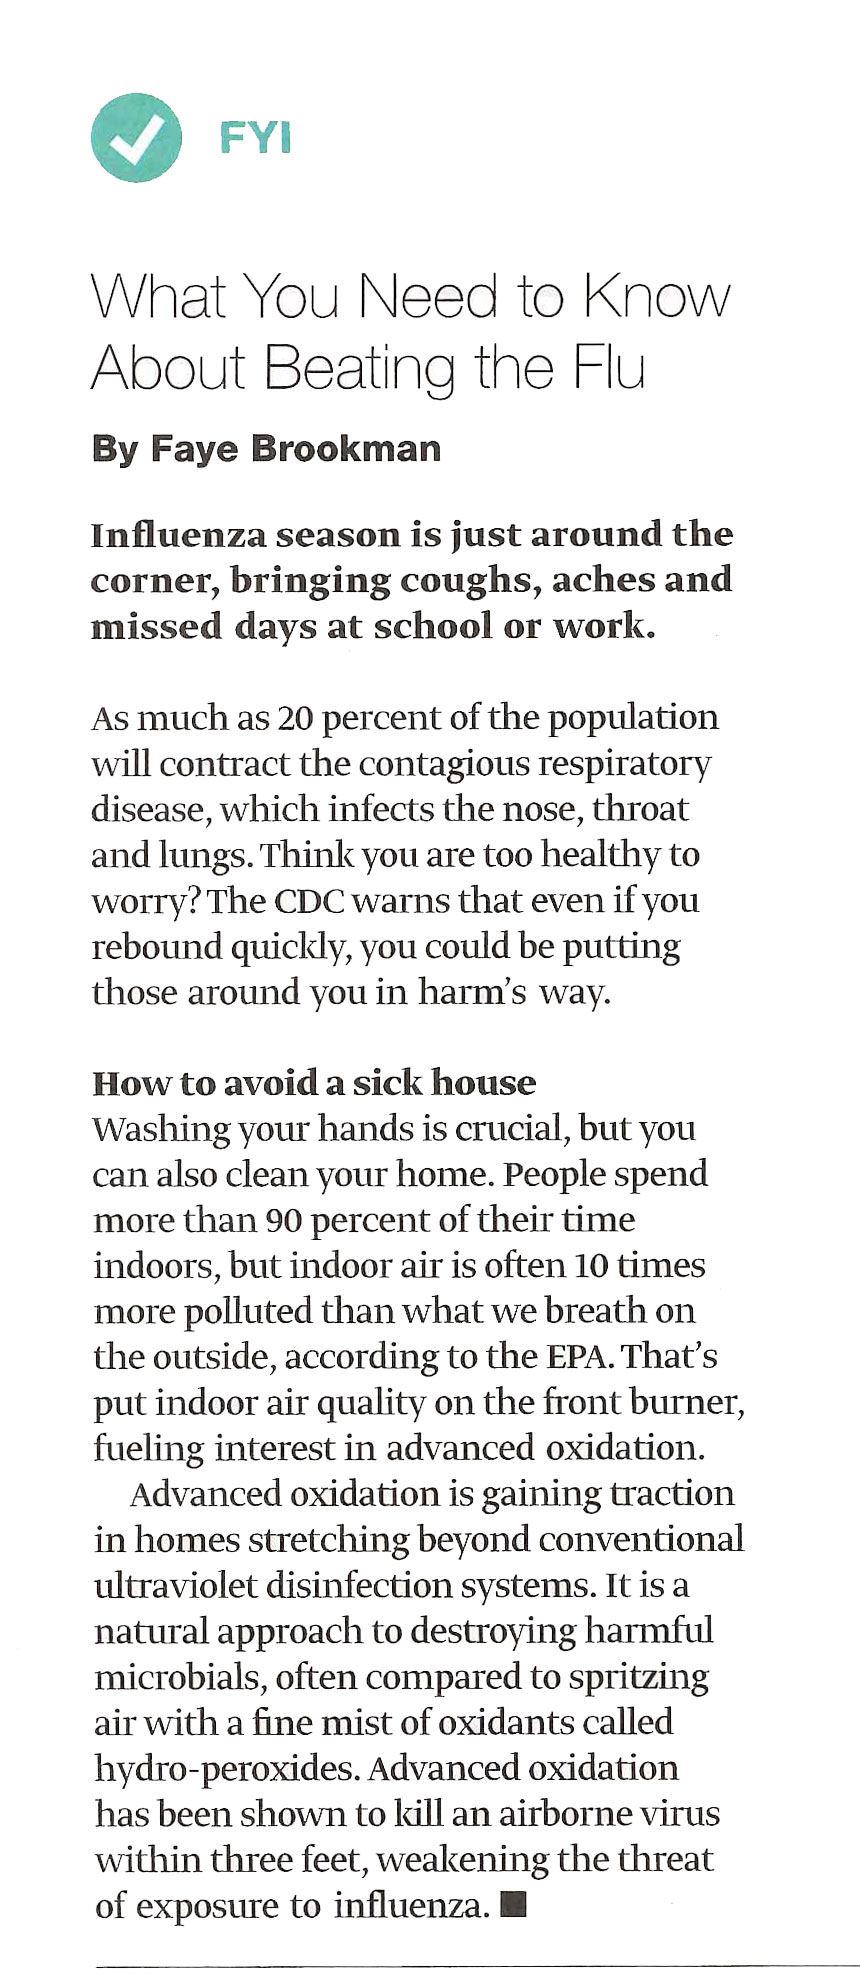 Article about the FLU